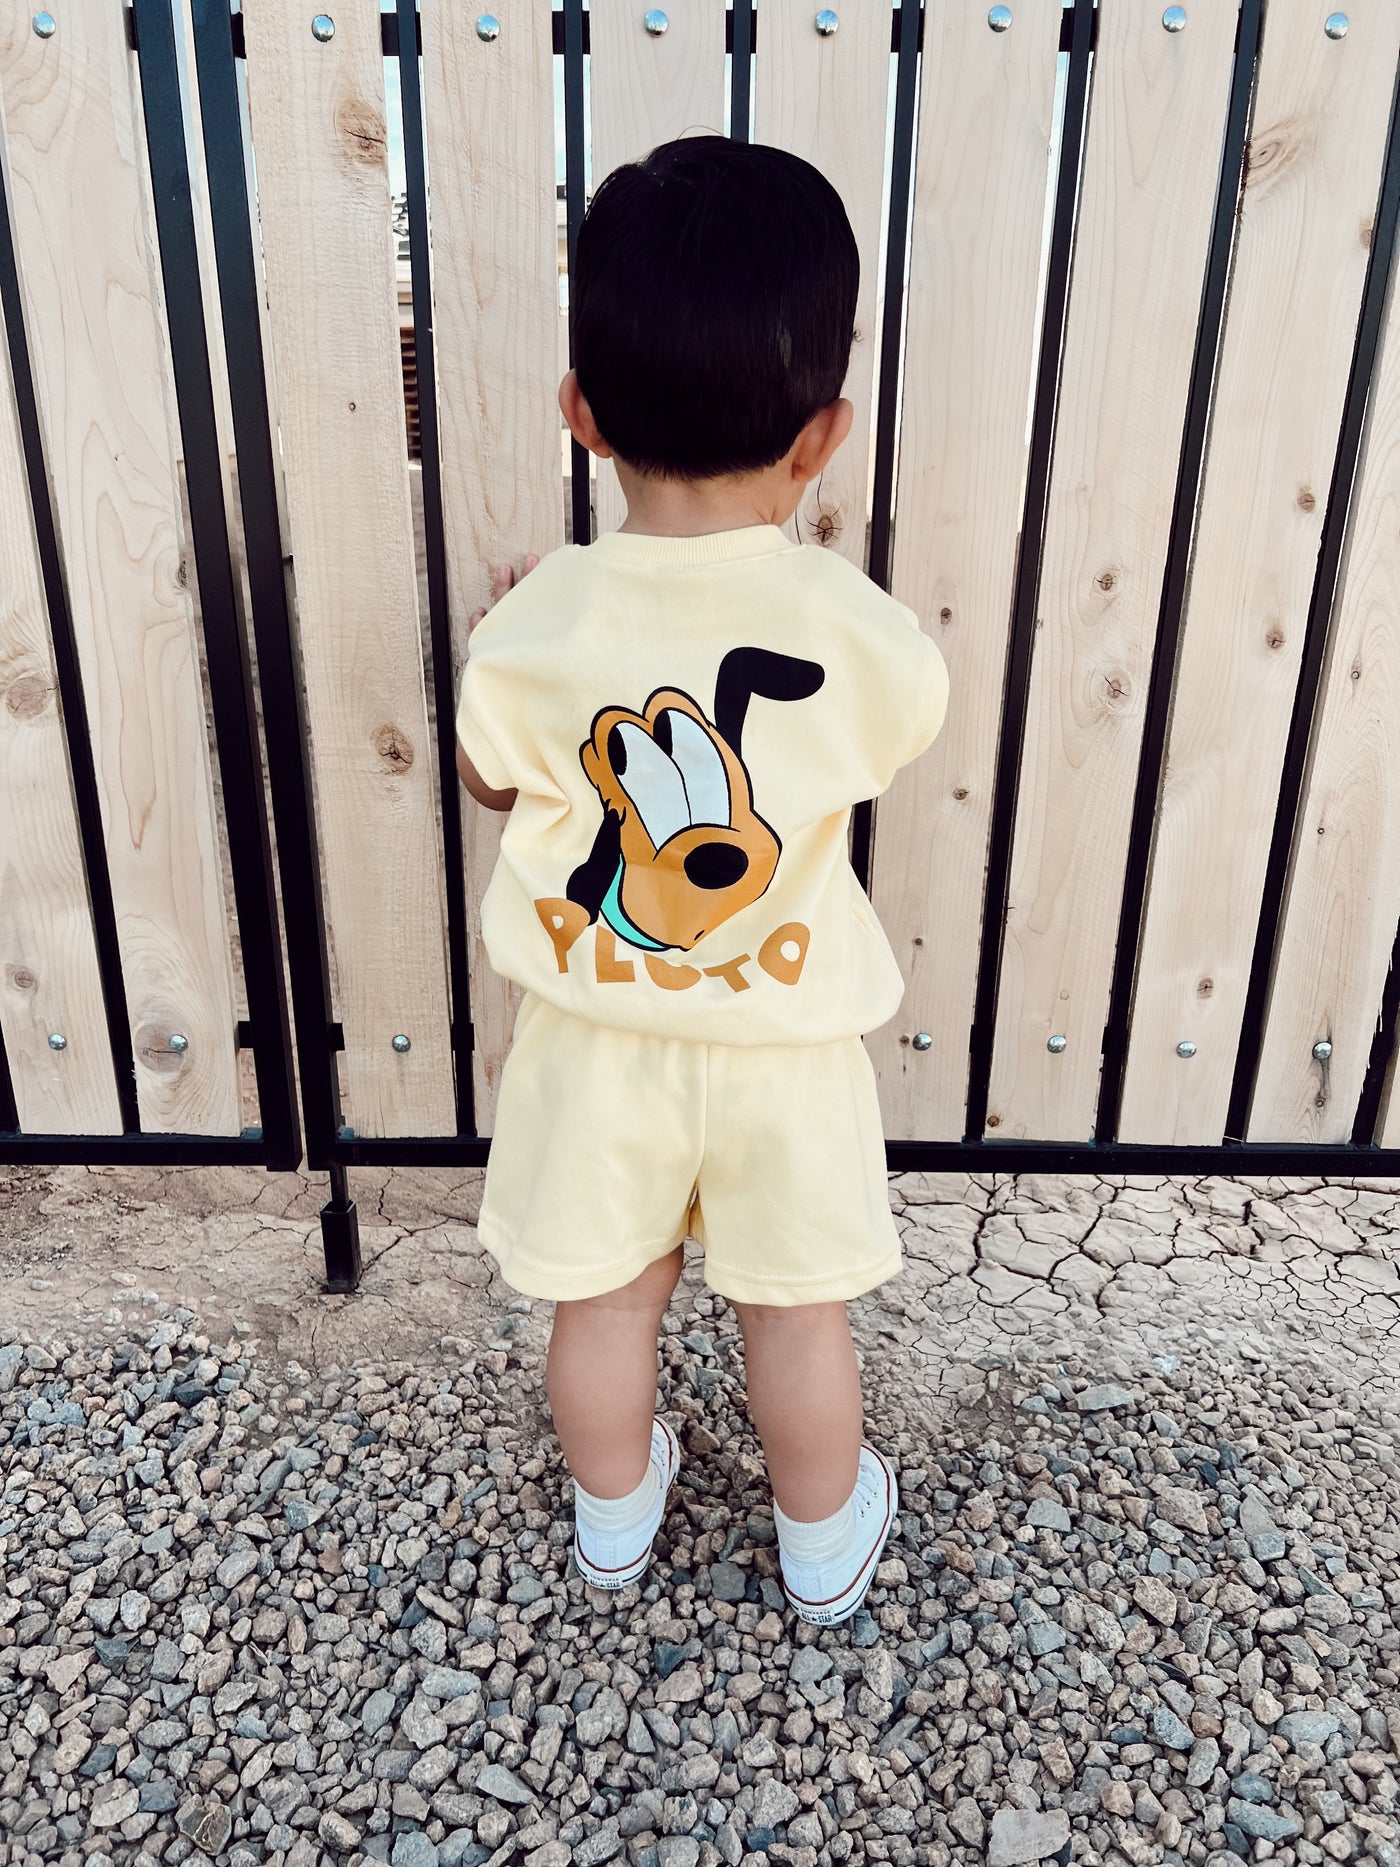 Mickey Friends Embroidered Vest Set